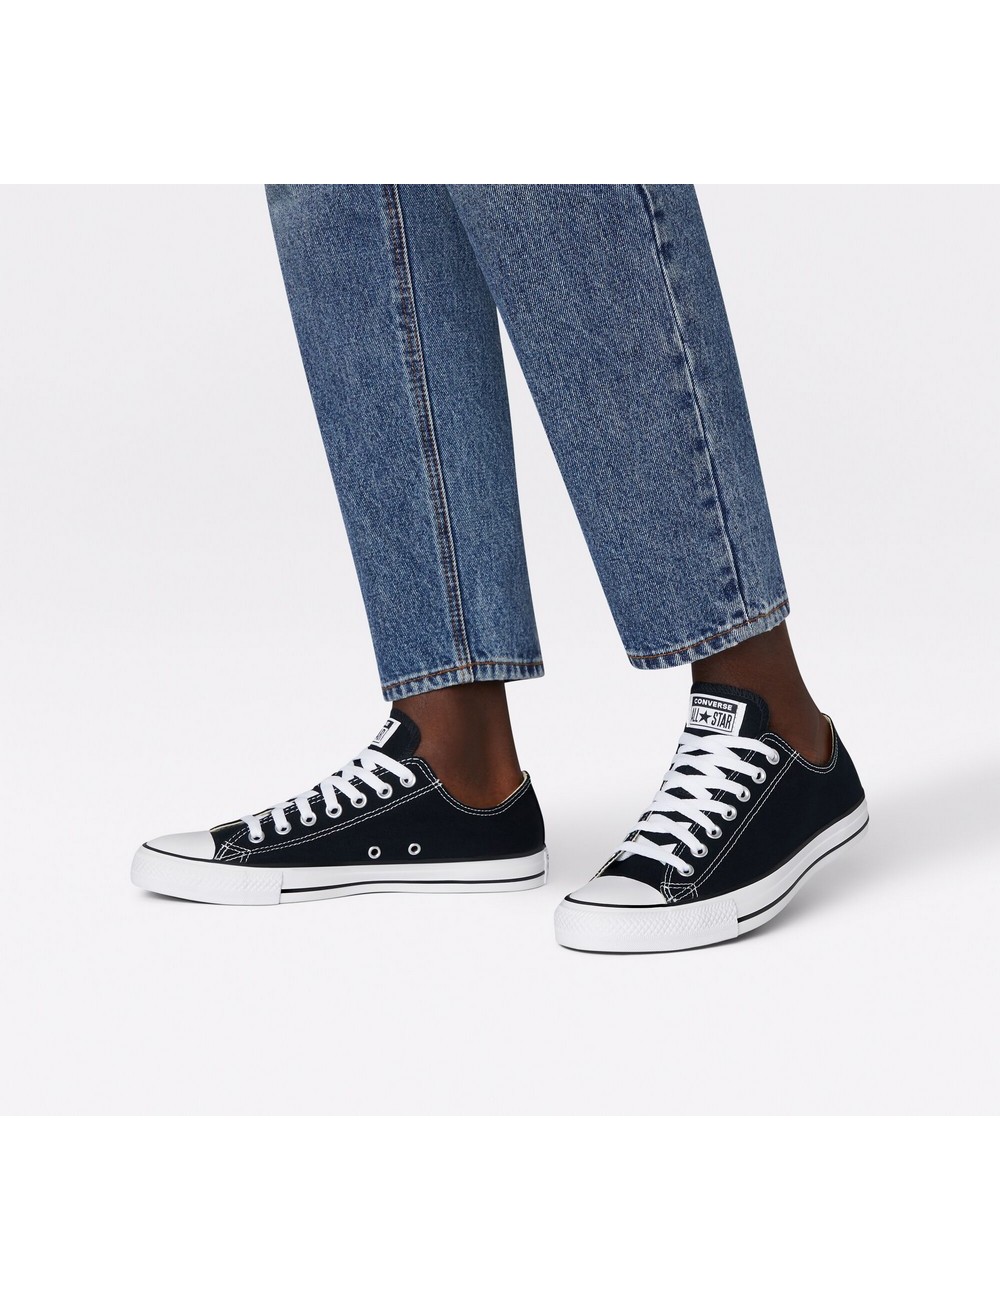 SNEAKERS CONVERSE CHUCK TAYLOR ALL STAR LOW TOP